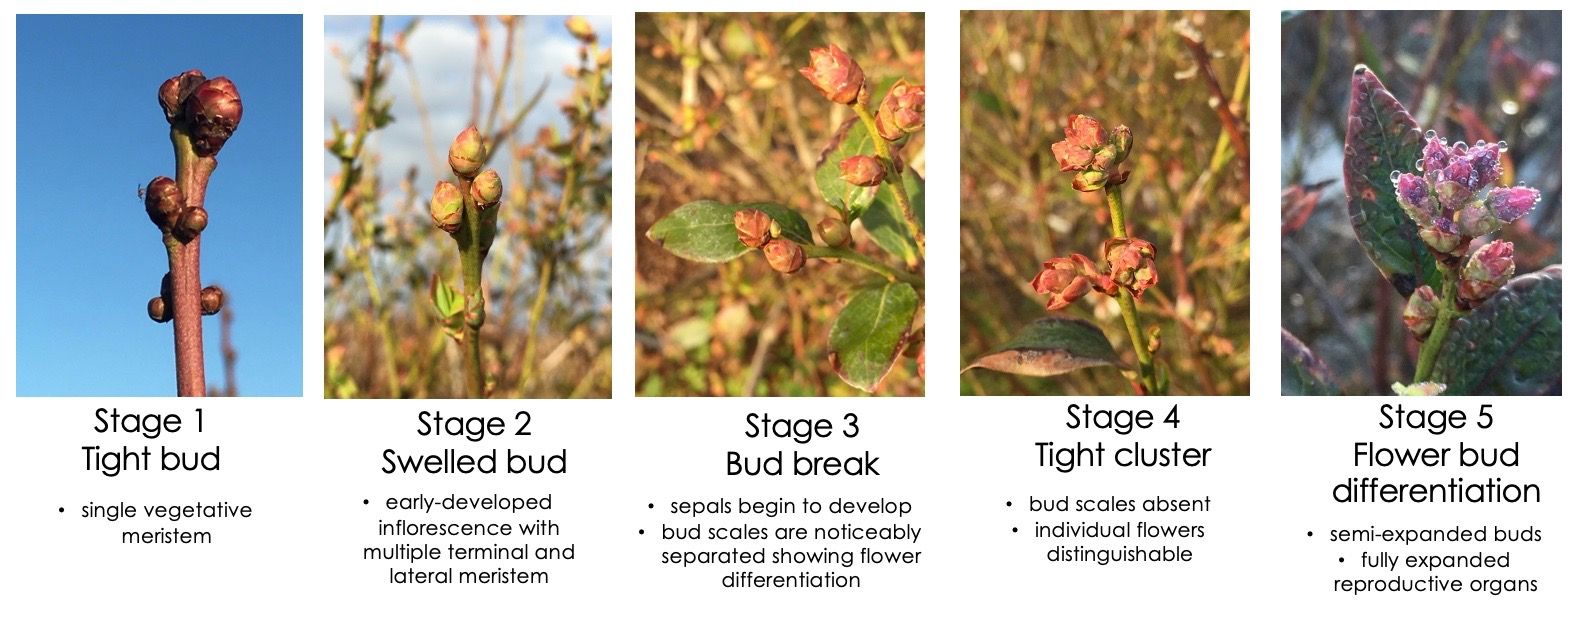 Blueberry buds in various stages of development. Spiers (1978) created a scale to describe inflorescence bud development of rabbiteye and southern highbush cultivars. The scale follows stages 1 through 5, where stage 1 is a tight bud and stage 5 shows flower bud differentiation.